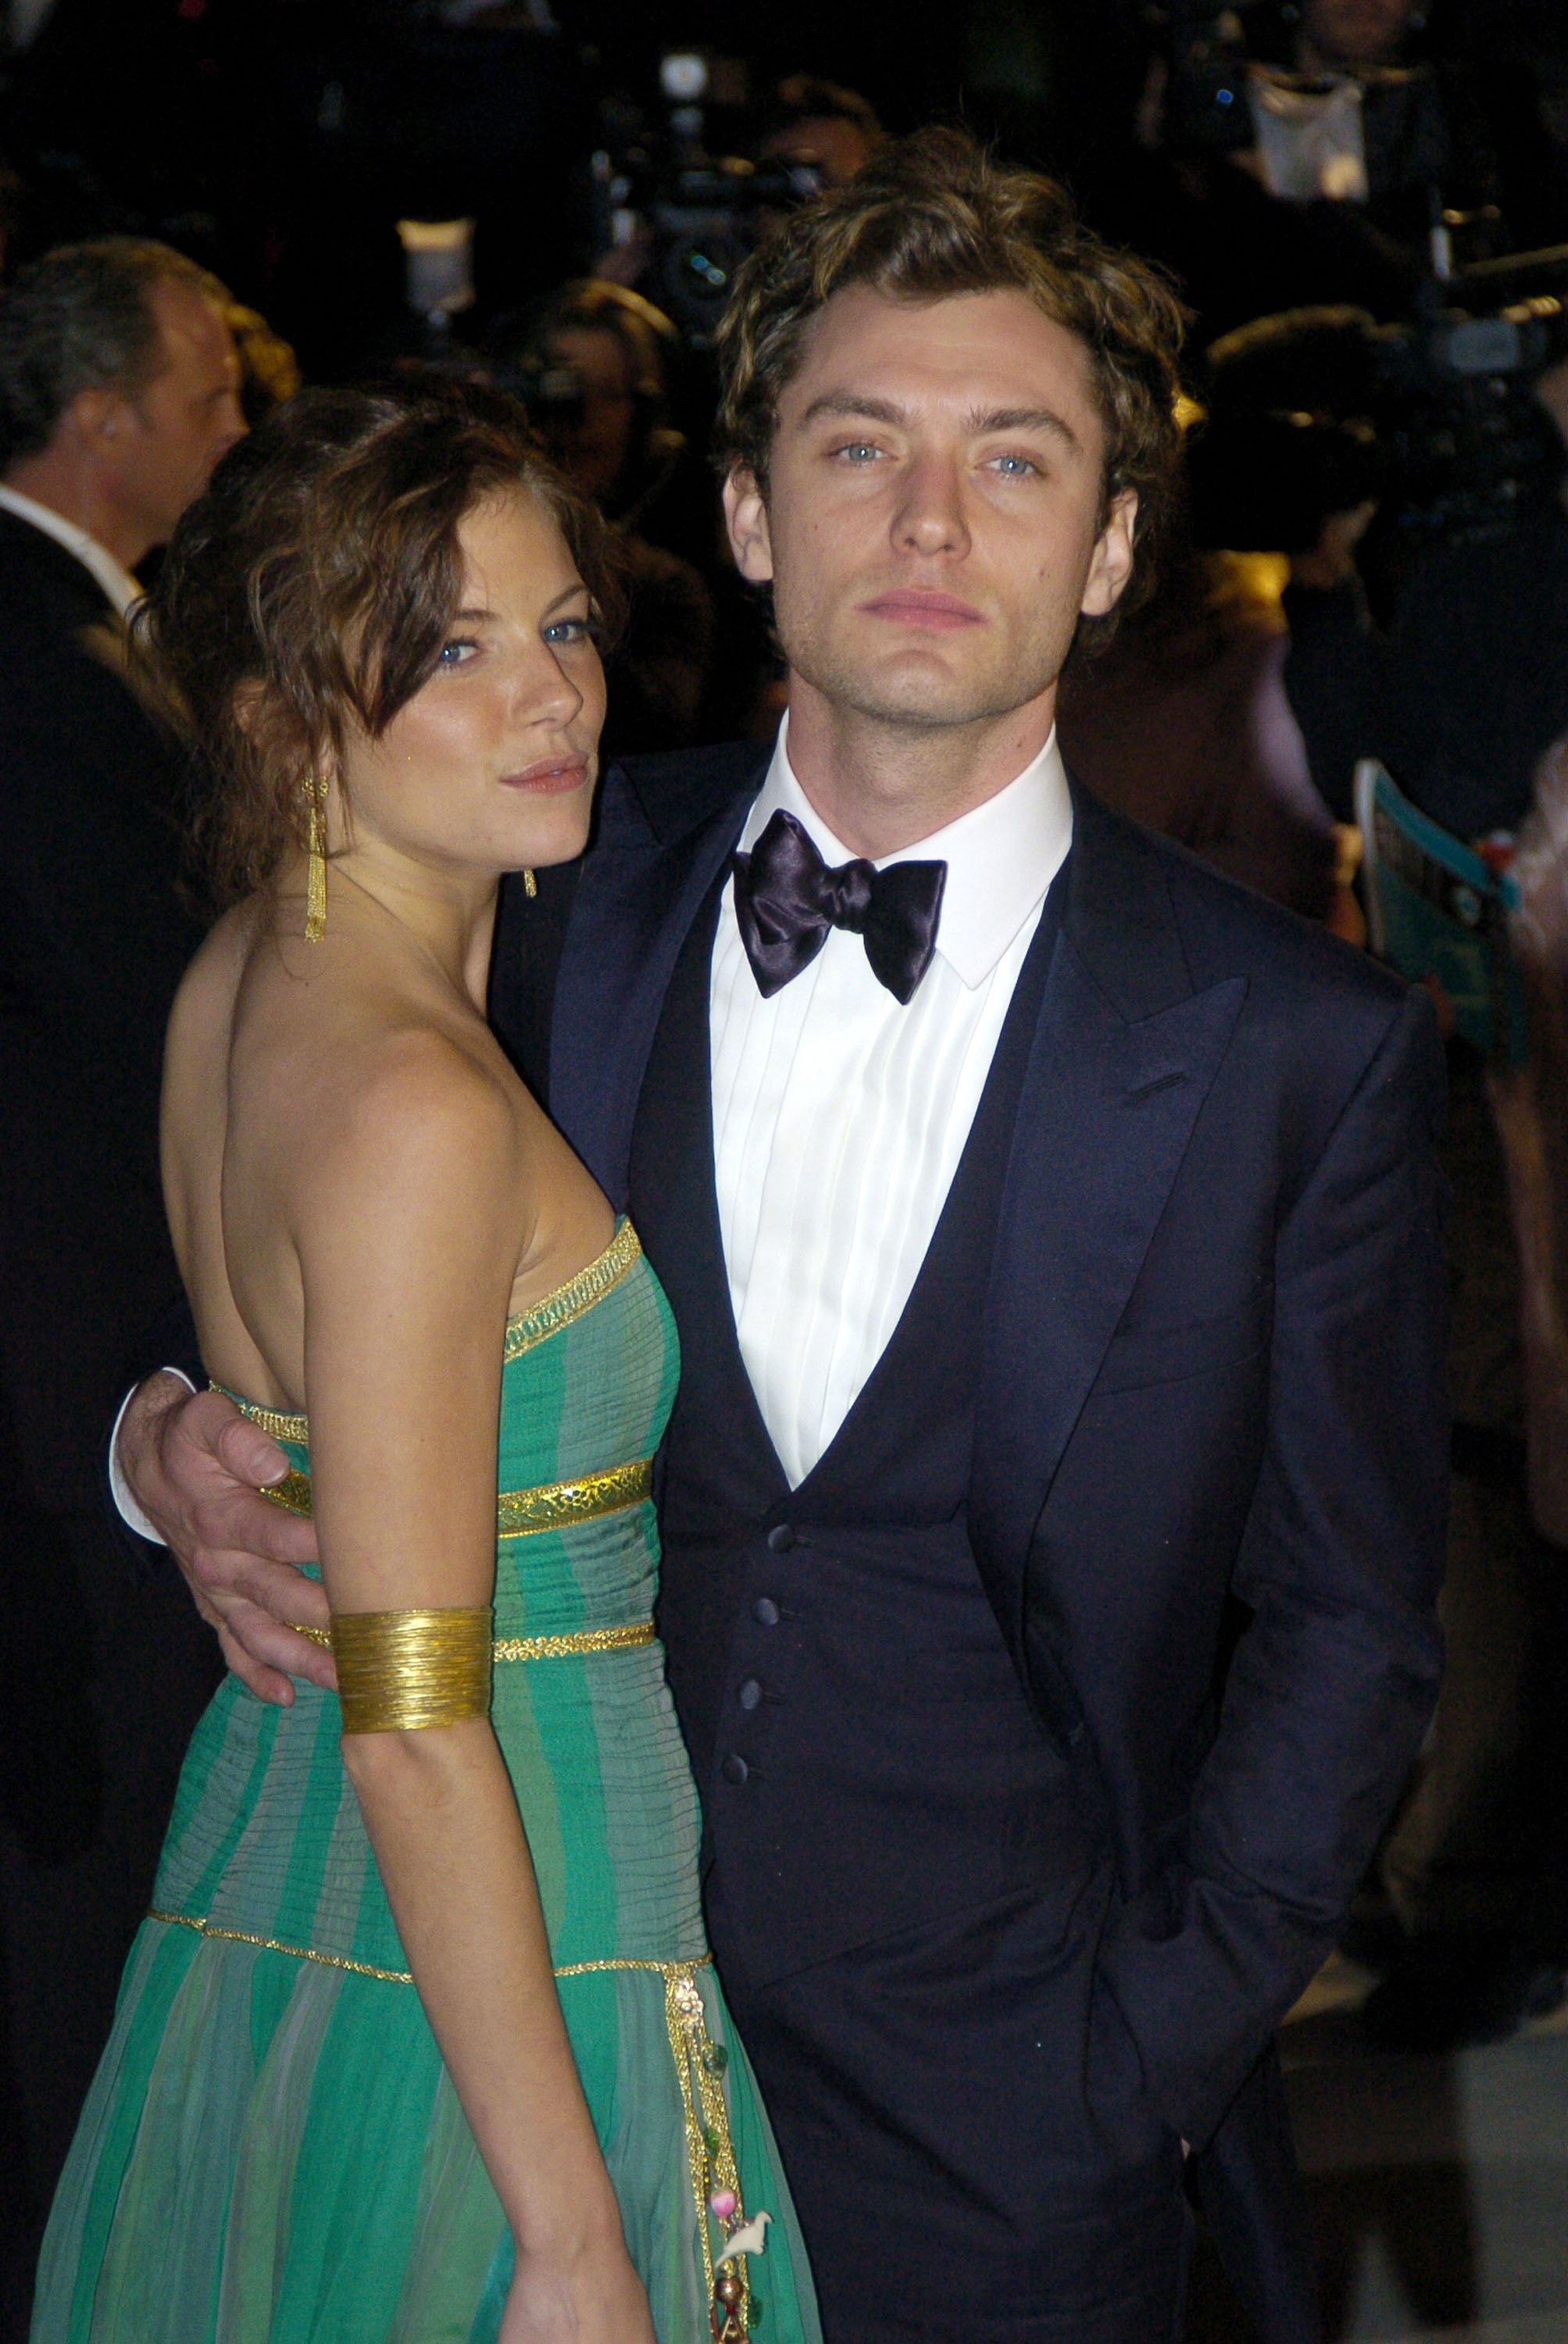 Sienna Miller and Jude Law attend the 2004 Vanity Fair Oscar Party at Mortons, on February 29, 2004, in Beverly Hills, California. | Source: Getty Images